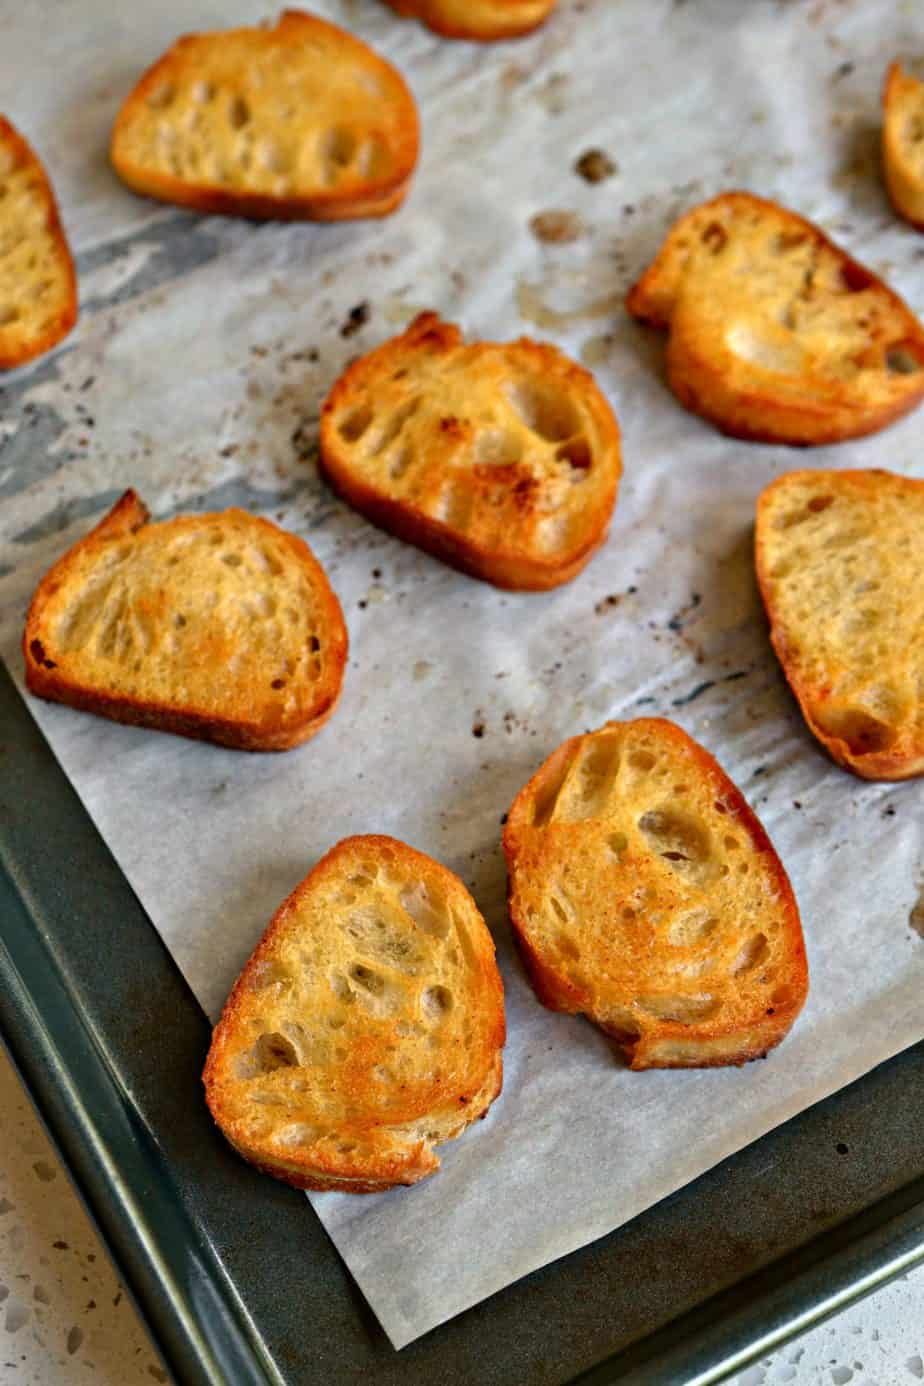 These homemade crostini are quick and easy, cheaper than store bought and taste so much better.